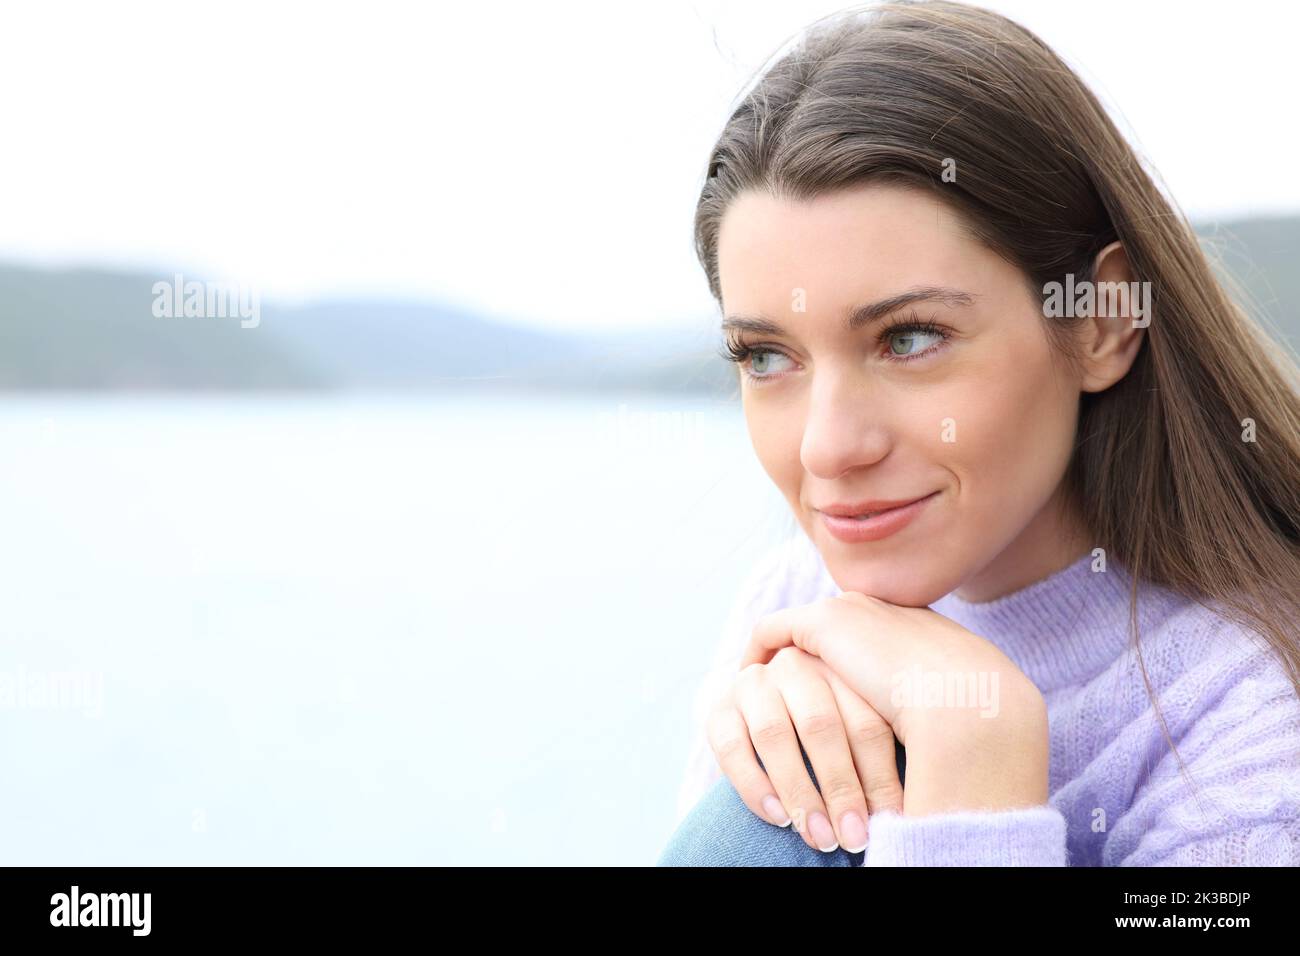 Confident woman relaxing and contemplating nature Stock Photo